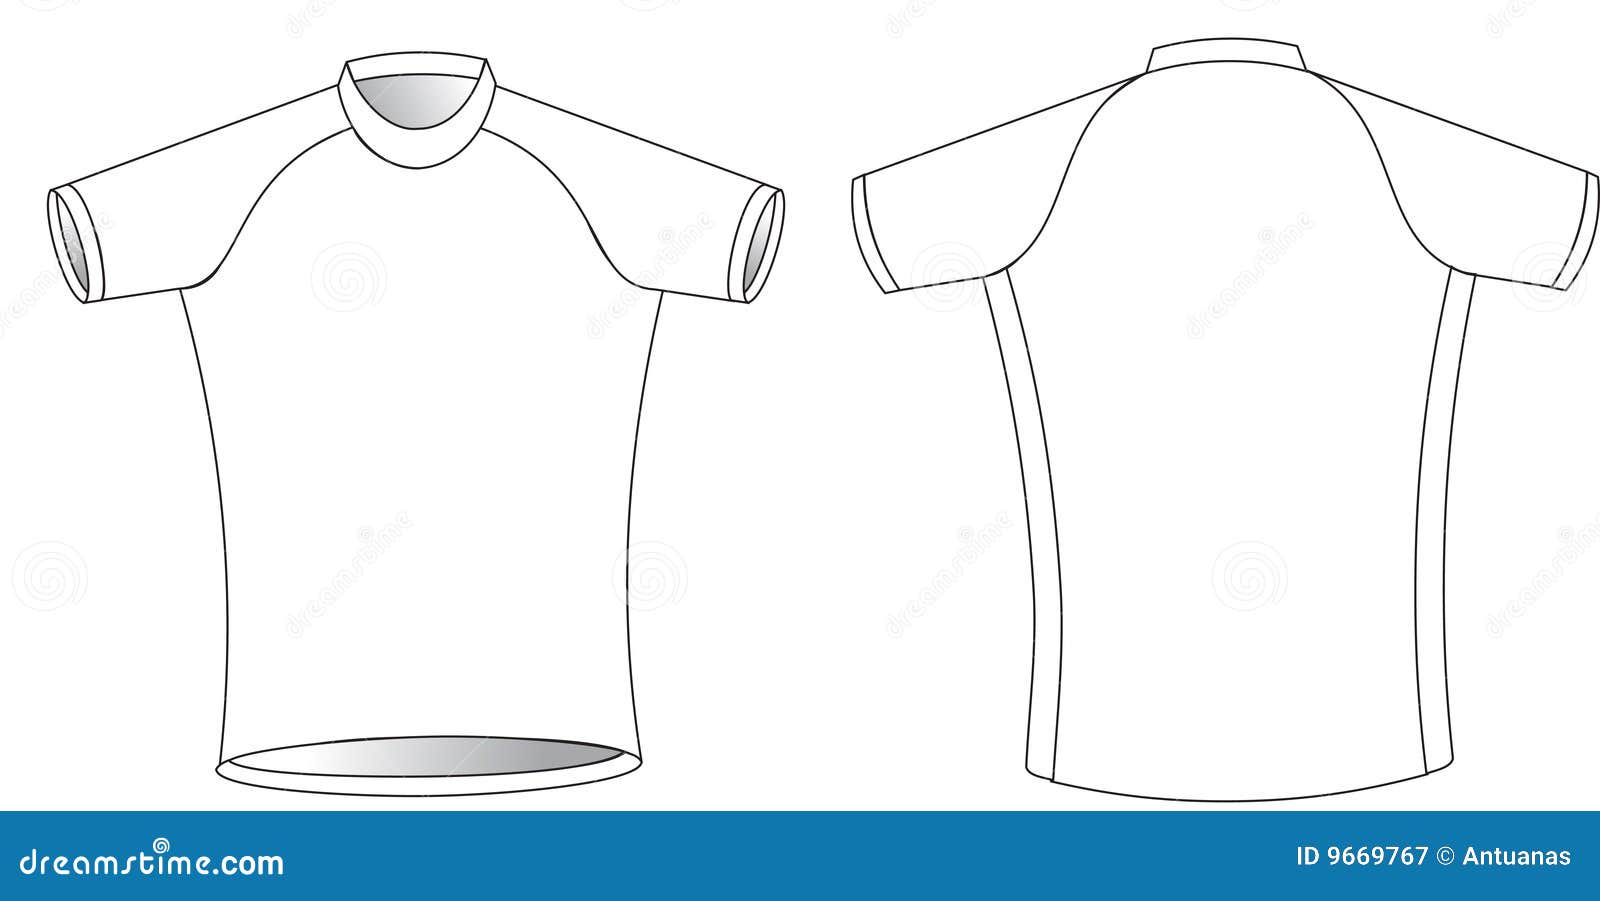 Cycling jersey stock vector. Illustration of shirt, clothing - 21 Inside Blank Cycling Jersey Template